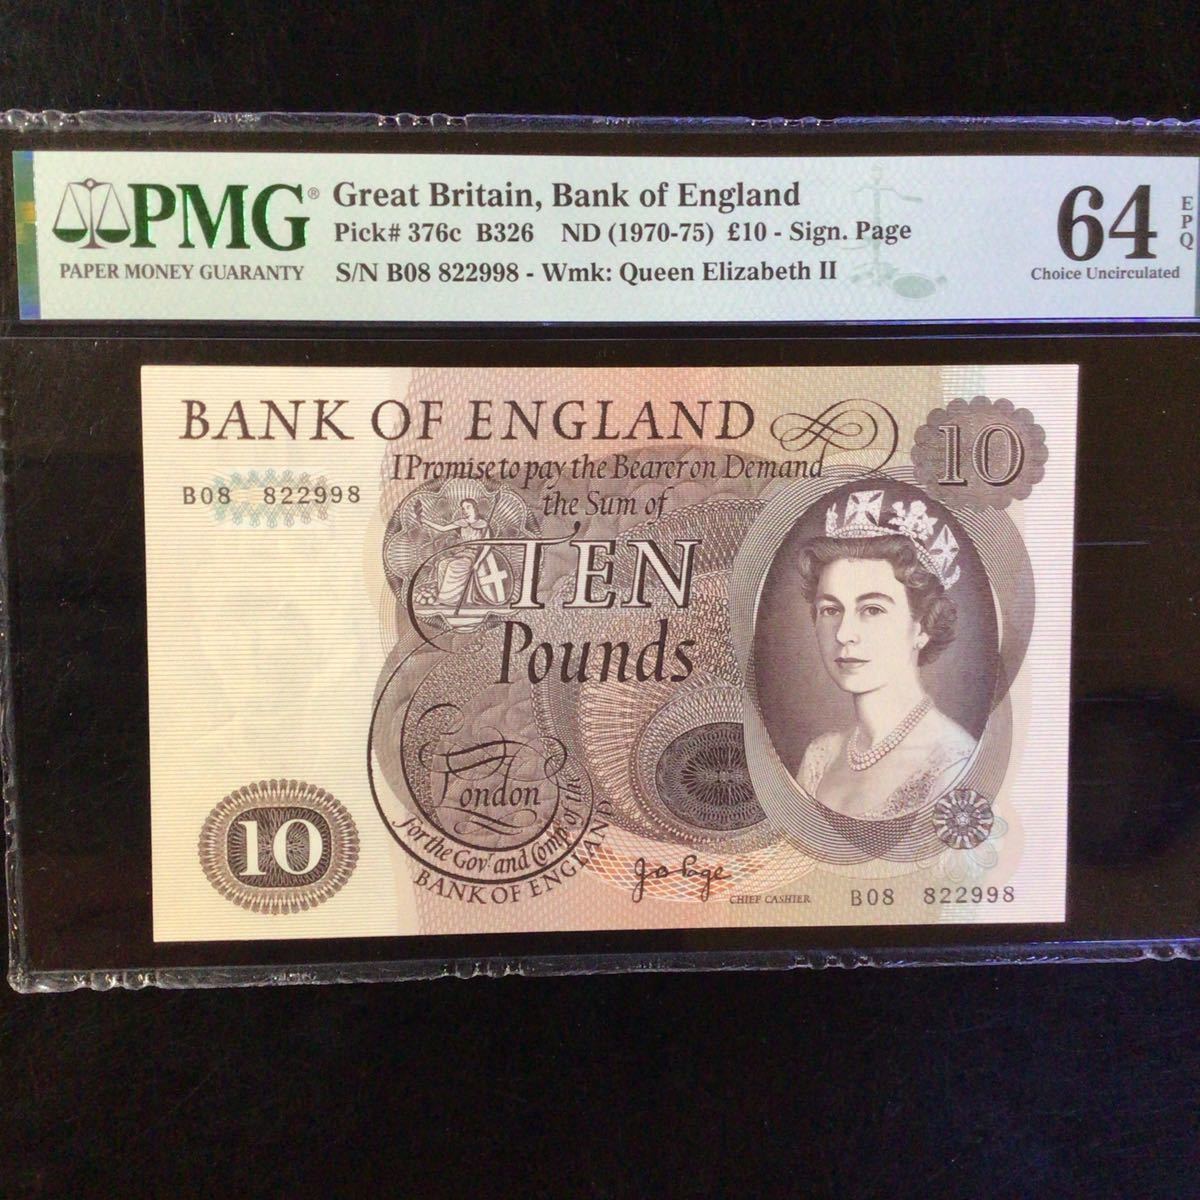 World Banknote Grading GREAT BRITAIN《Bank of England》10 Pounds【1970-75】『PMG Grading Choice Uncirculated 64 EPQ』.